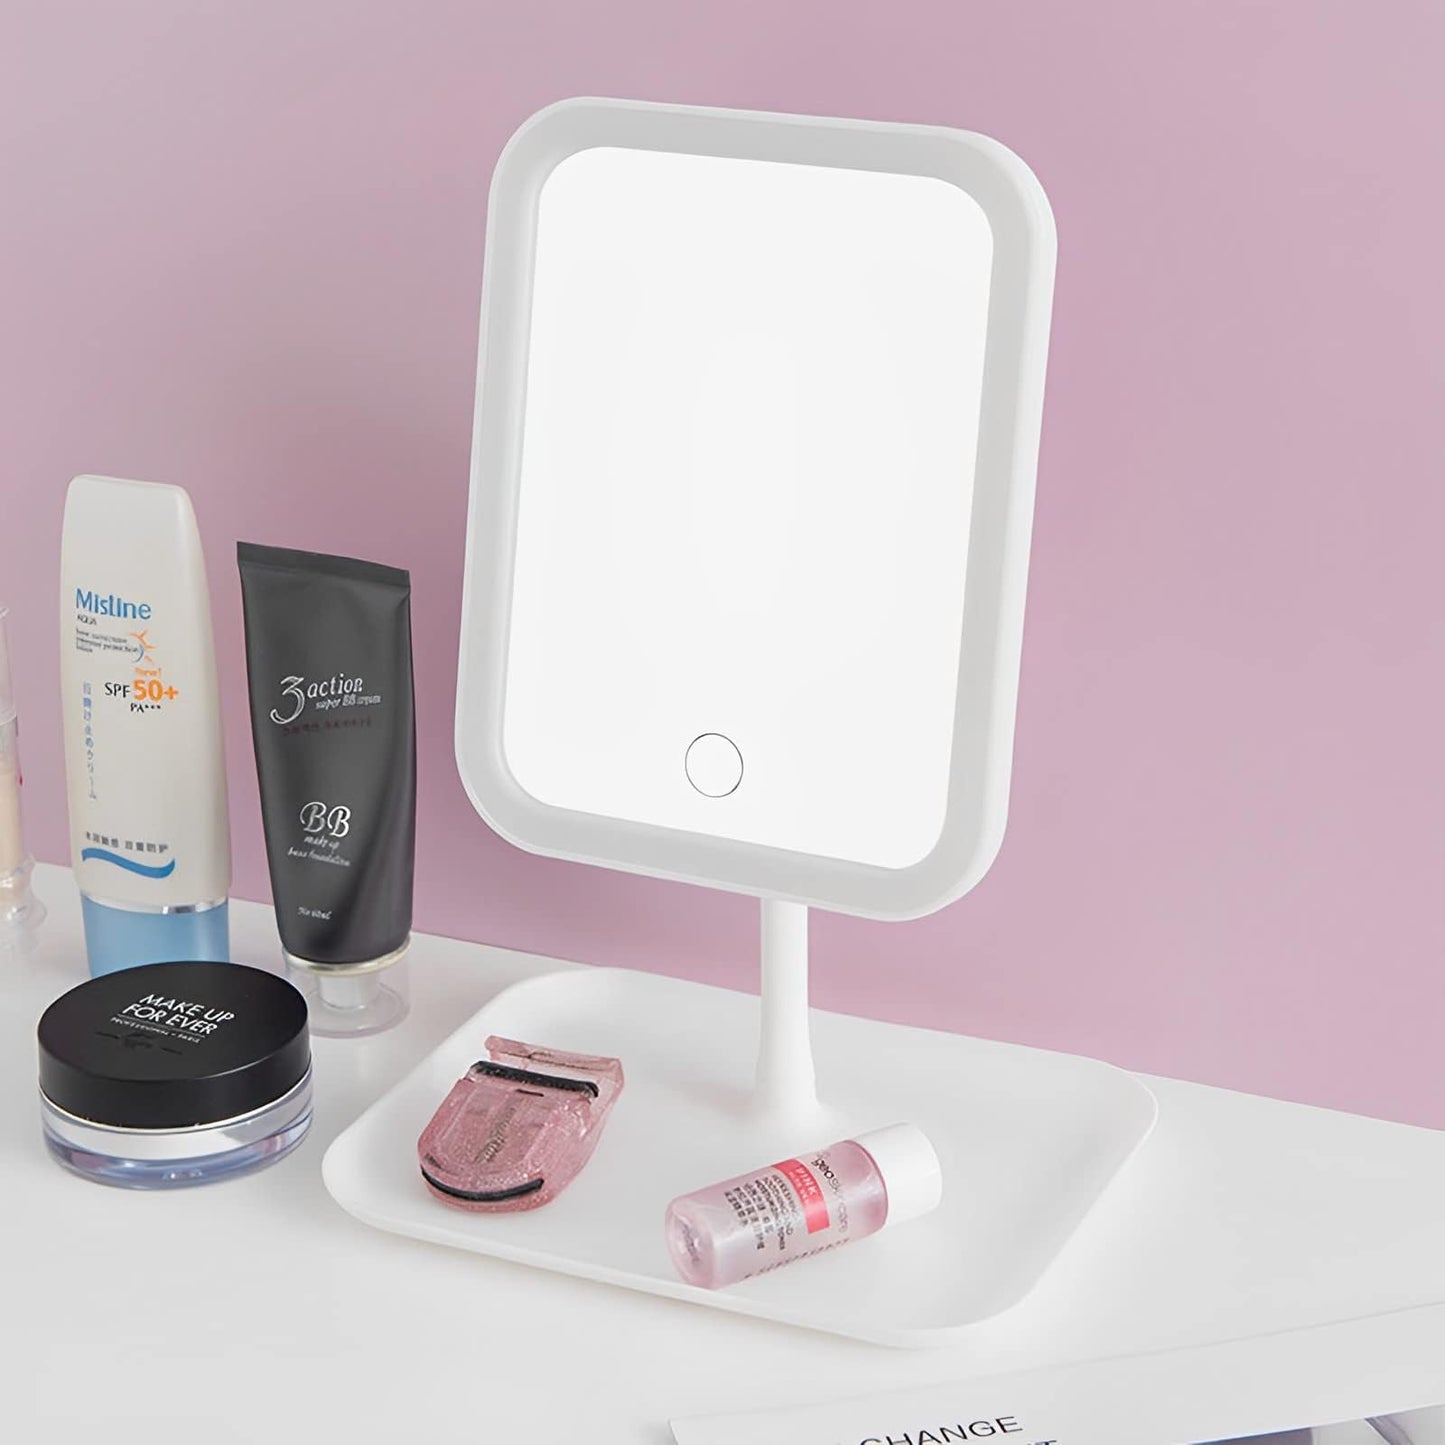 Birthday Gifts for Mom/Daughter, Vanity Mirror with Lights, dimmable LED makeup mirror with 3 color lighting modes, portable light-up makeup mirror, suitable for travel, room and public places